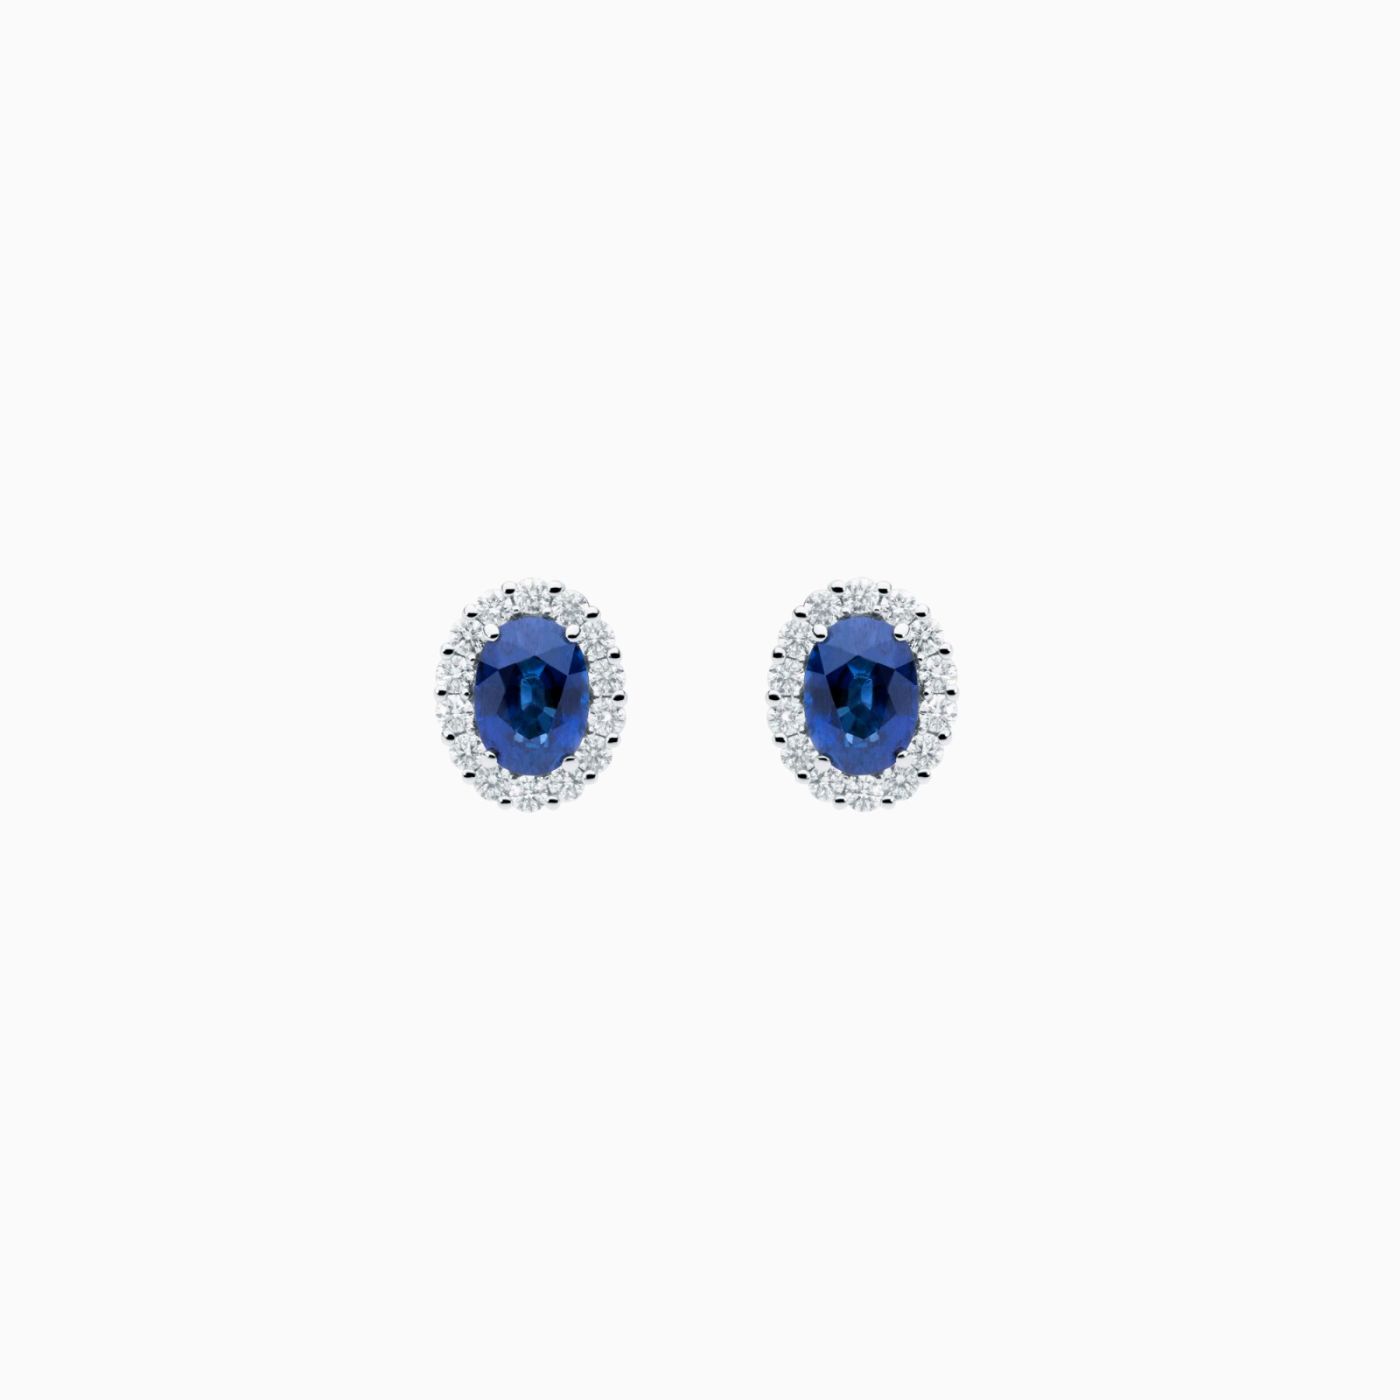 White gold earrings with sapphires and diamond orla